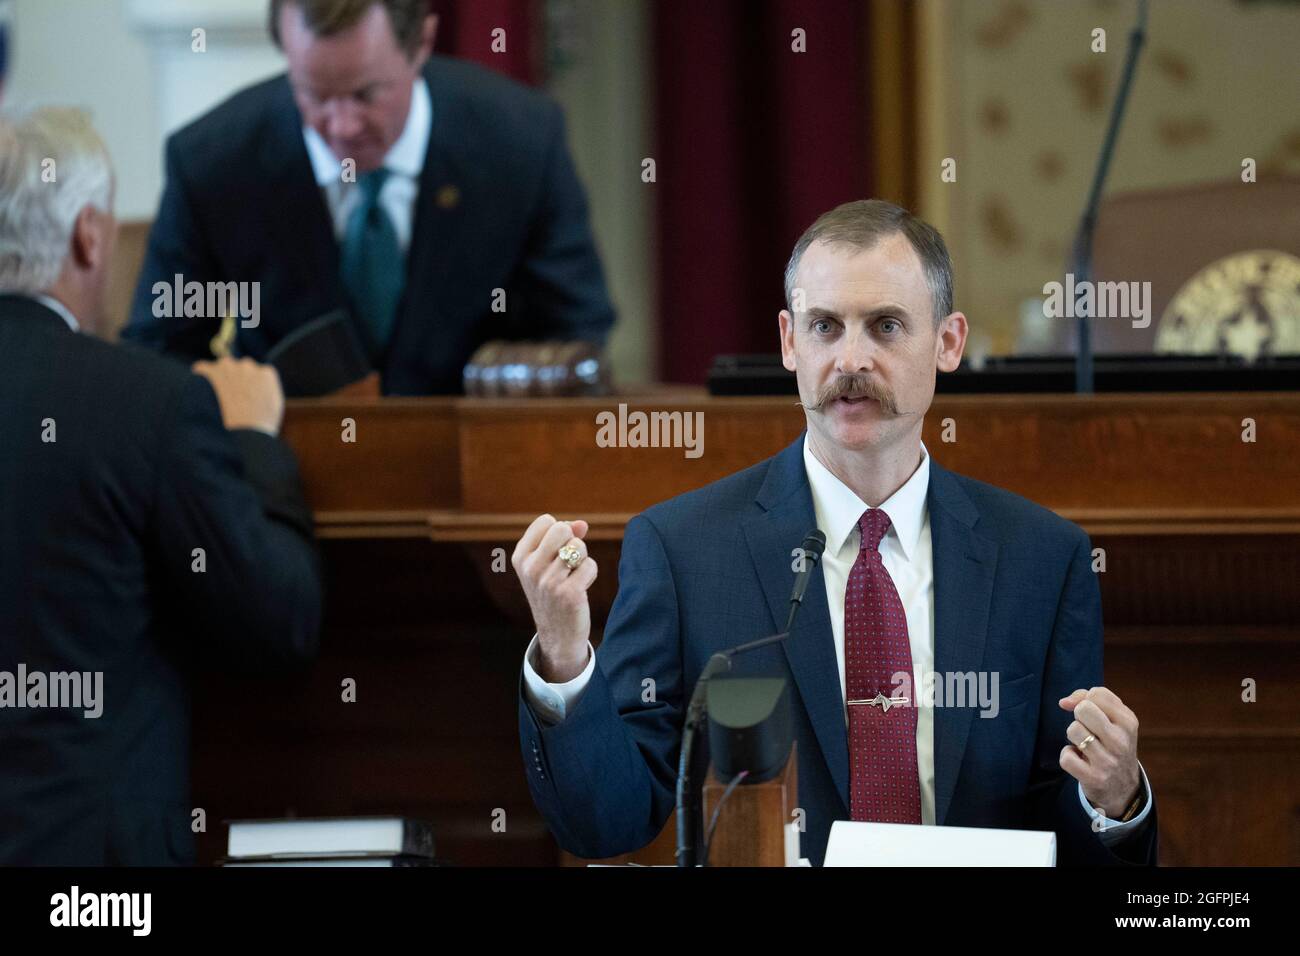 Austin Texas USA, Aug. 26, 2021: State Rep. Andrew Murr, R-Junction, lays out the bill as the Texas House debates SB 1, a Republican-led measure that would tighten voting procedures in Texas including a ban on 24-hour voting and mail-in ballot restrictions. The bill led to a 34-day Democratic walkout earlier in the session. Credit: Bob Daemmrich/Alamy Live News Stock Photo